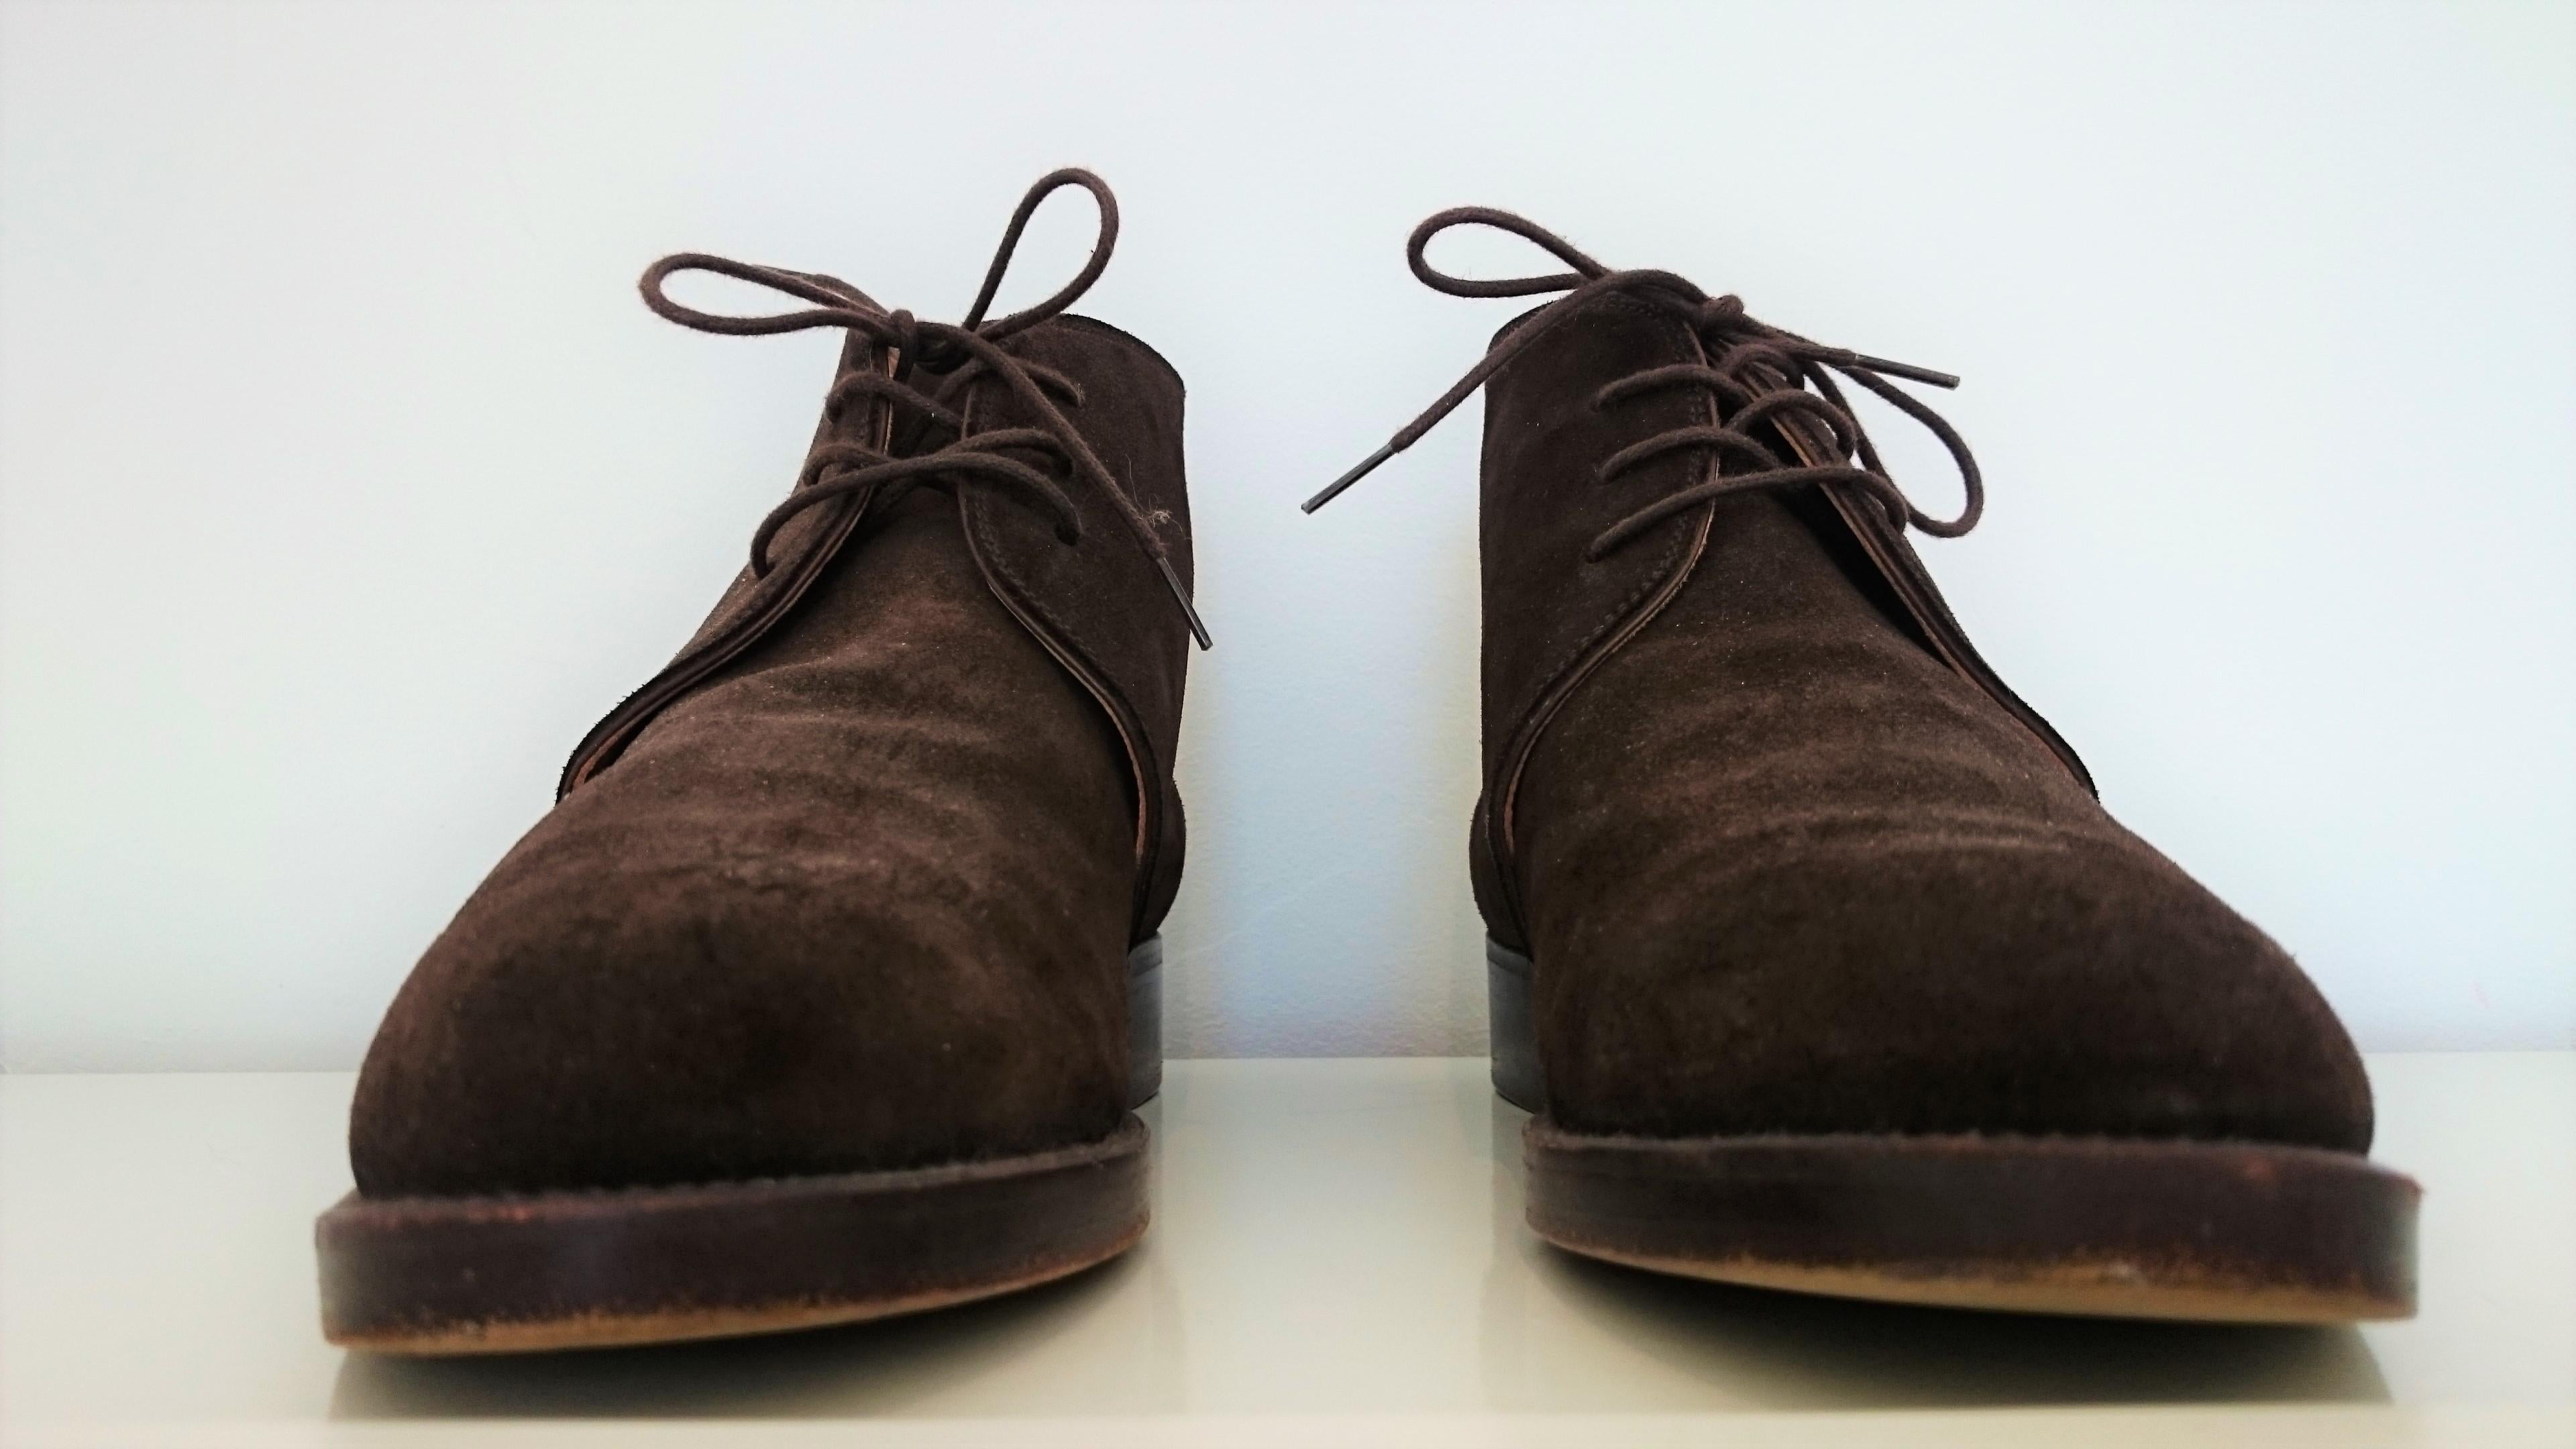 Hermès Brown Suede Ankle Boots. 
Great conditions
Size 40
Boot height: 14 cm
Made in Italy